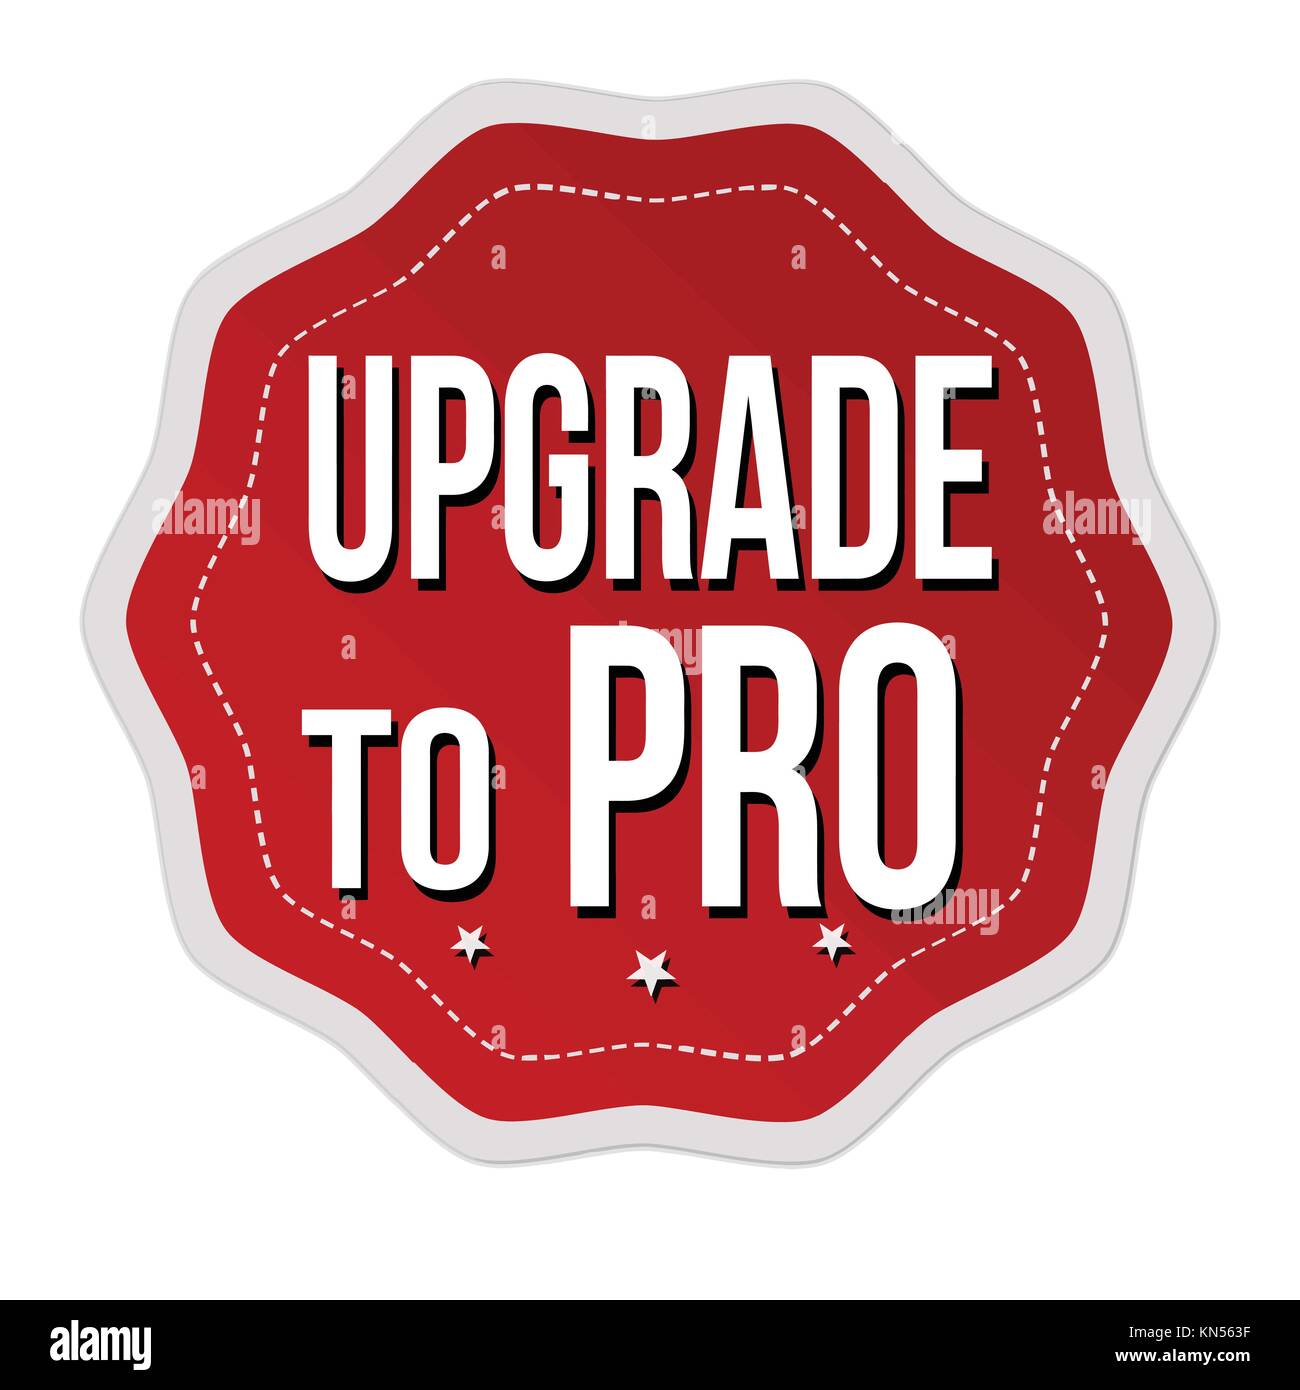 Upgrade to pro label or sticker on white background, vector illustration Stock Vector